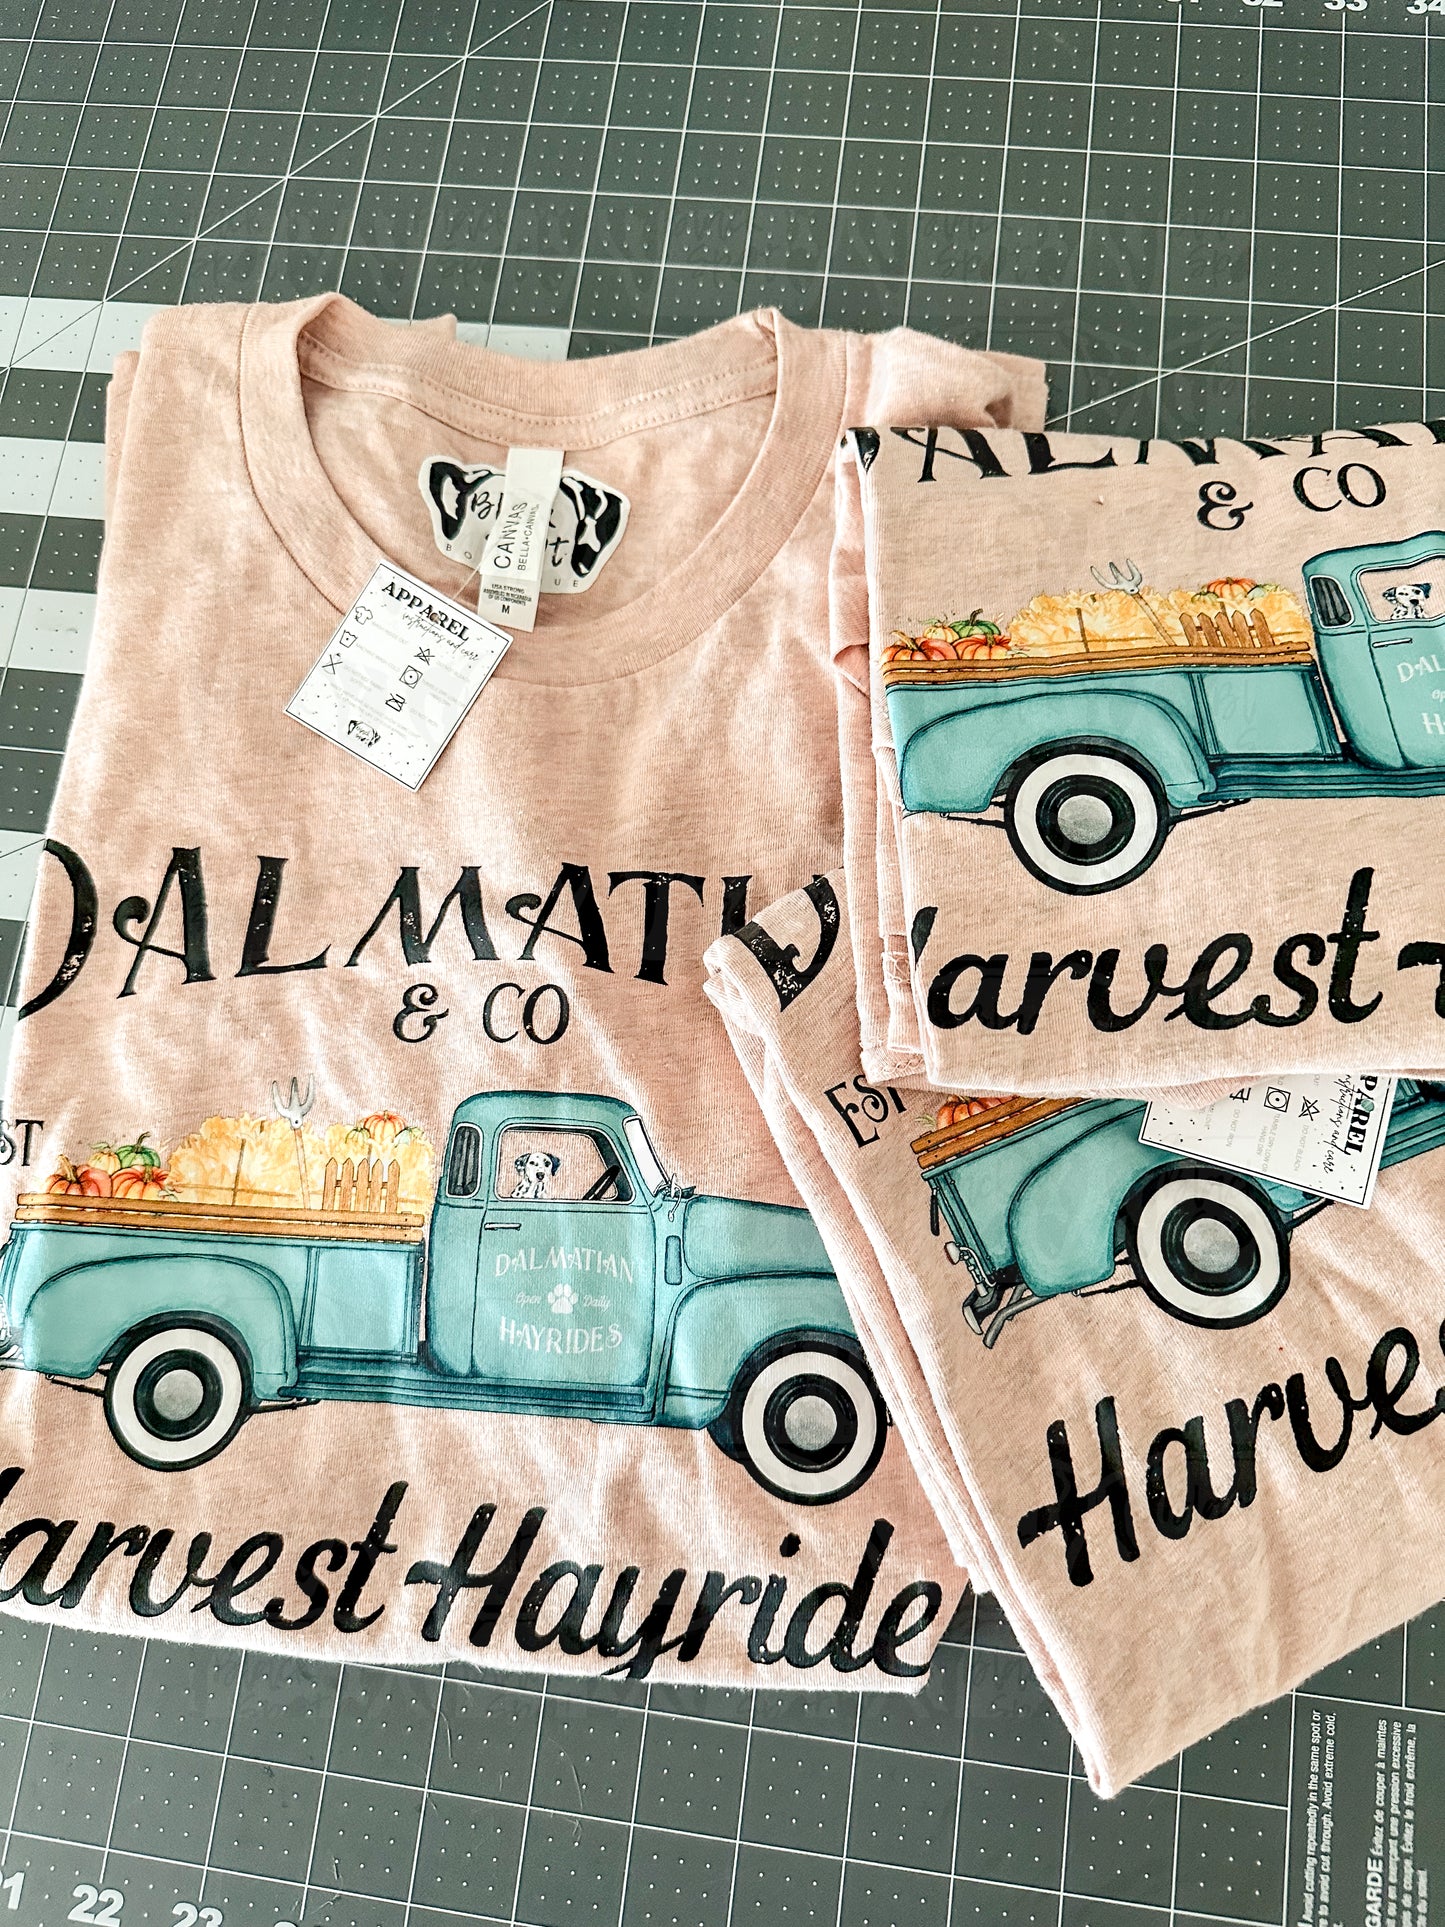 Harvest Hayride Truck Tee - Dalmatian and Co